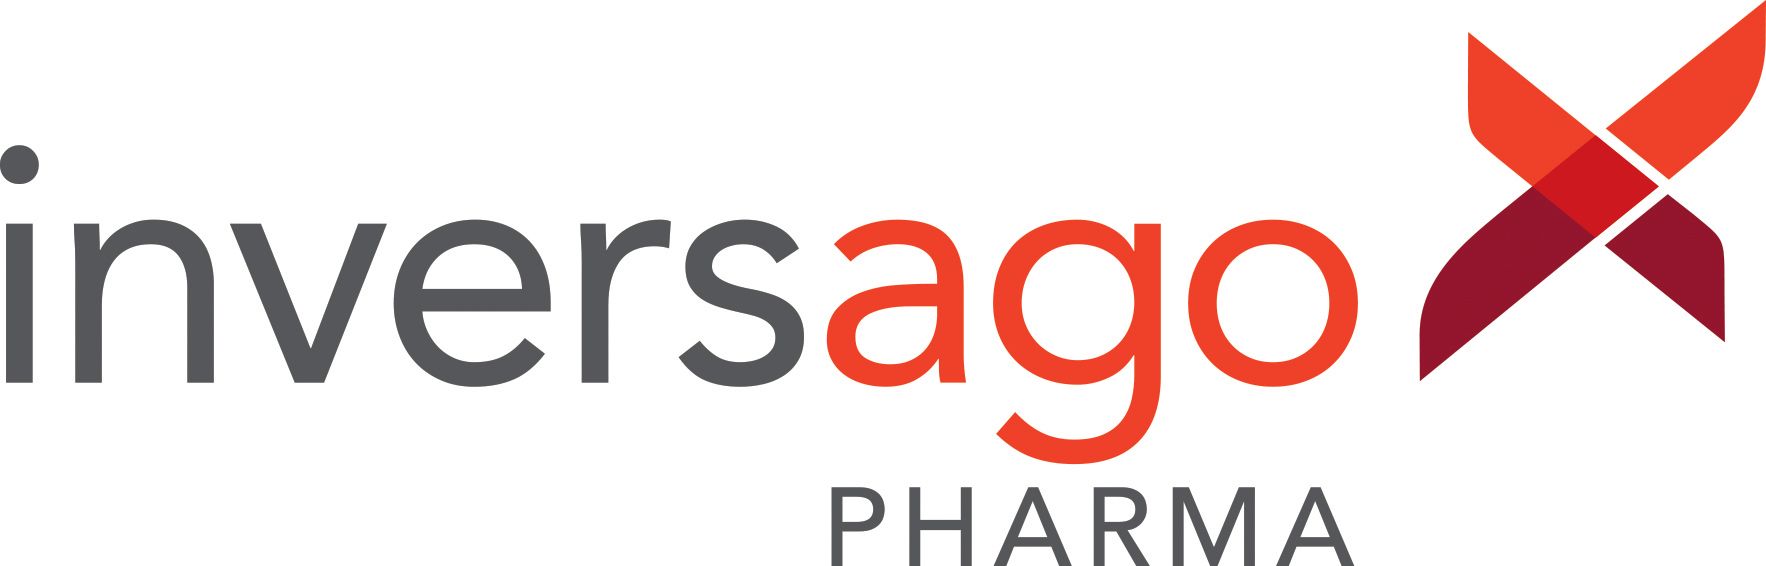 Inversago Pharma receives IND clearance for Phase 2 trial of INV-202 in Diabetic Kidney Disease